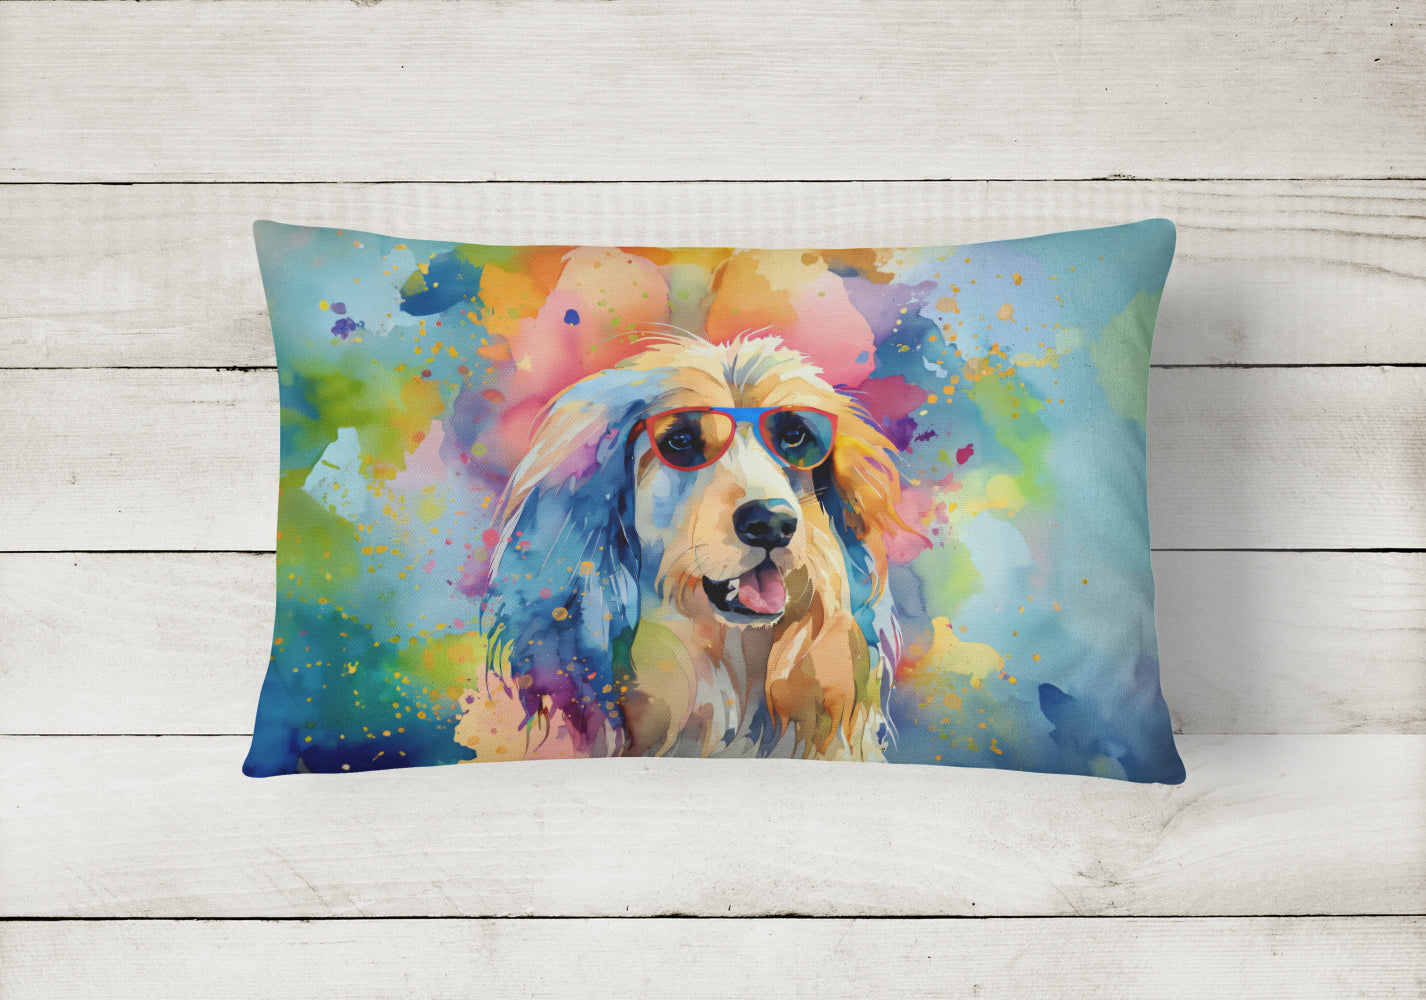 Afghan Hound Hippie Dawg Fabric Decorative Pillow